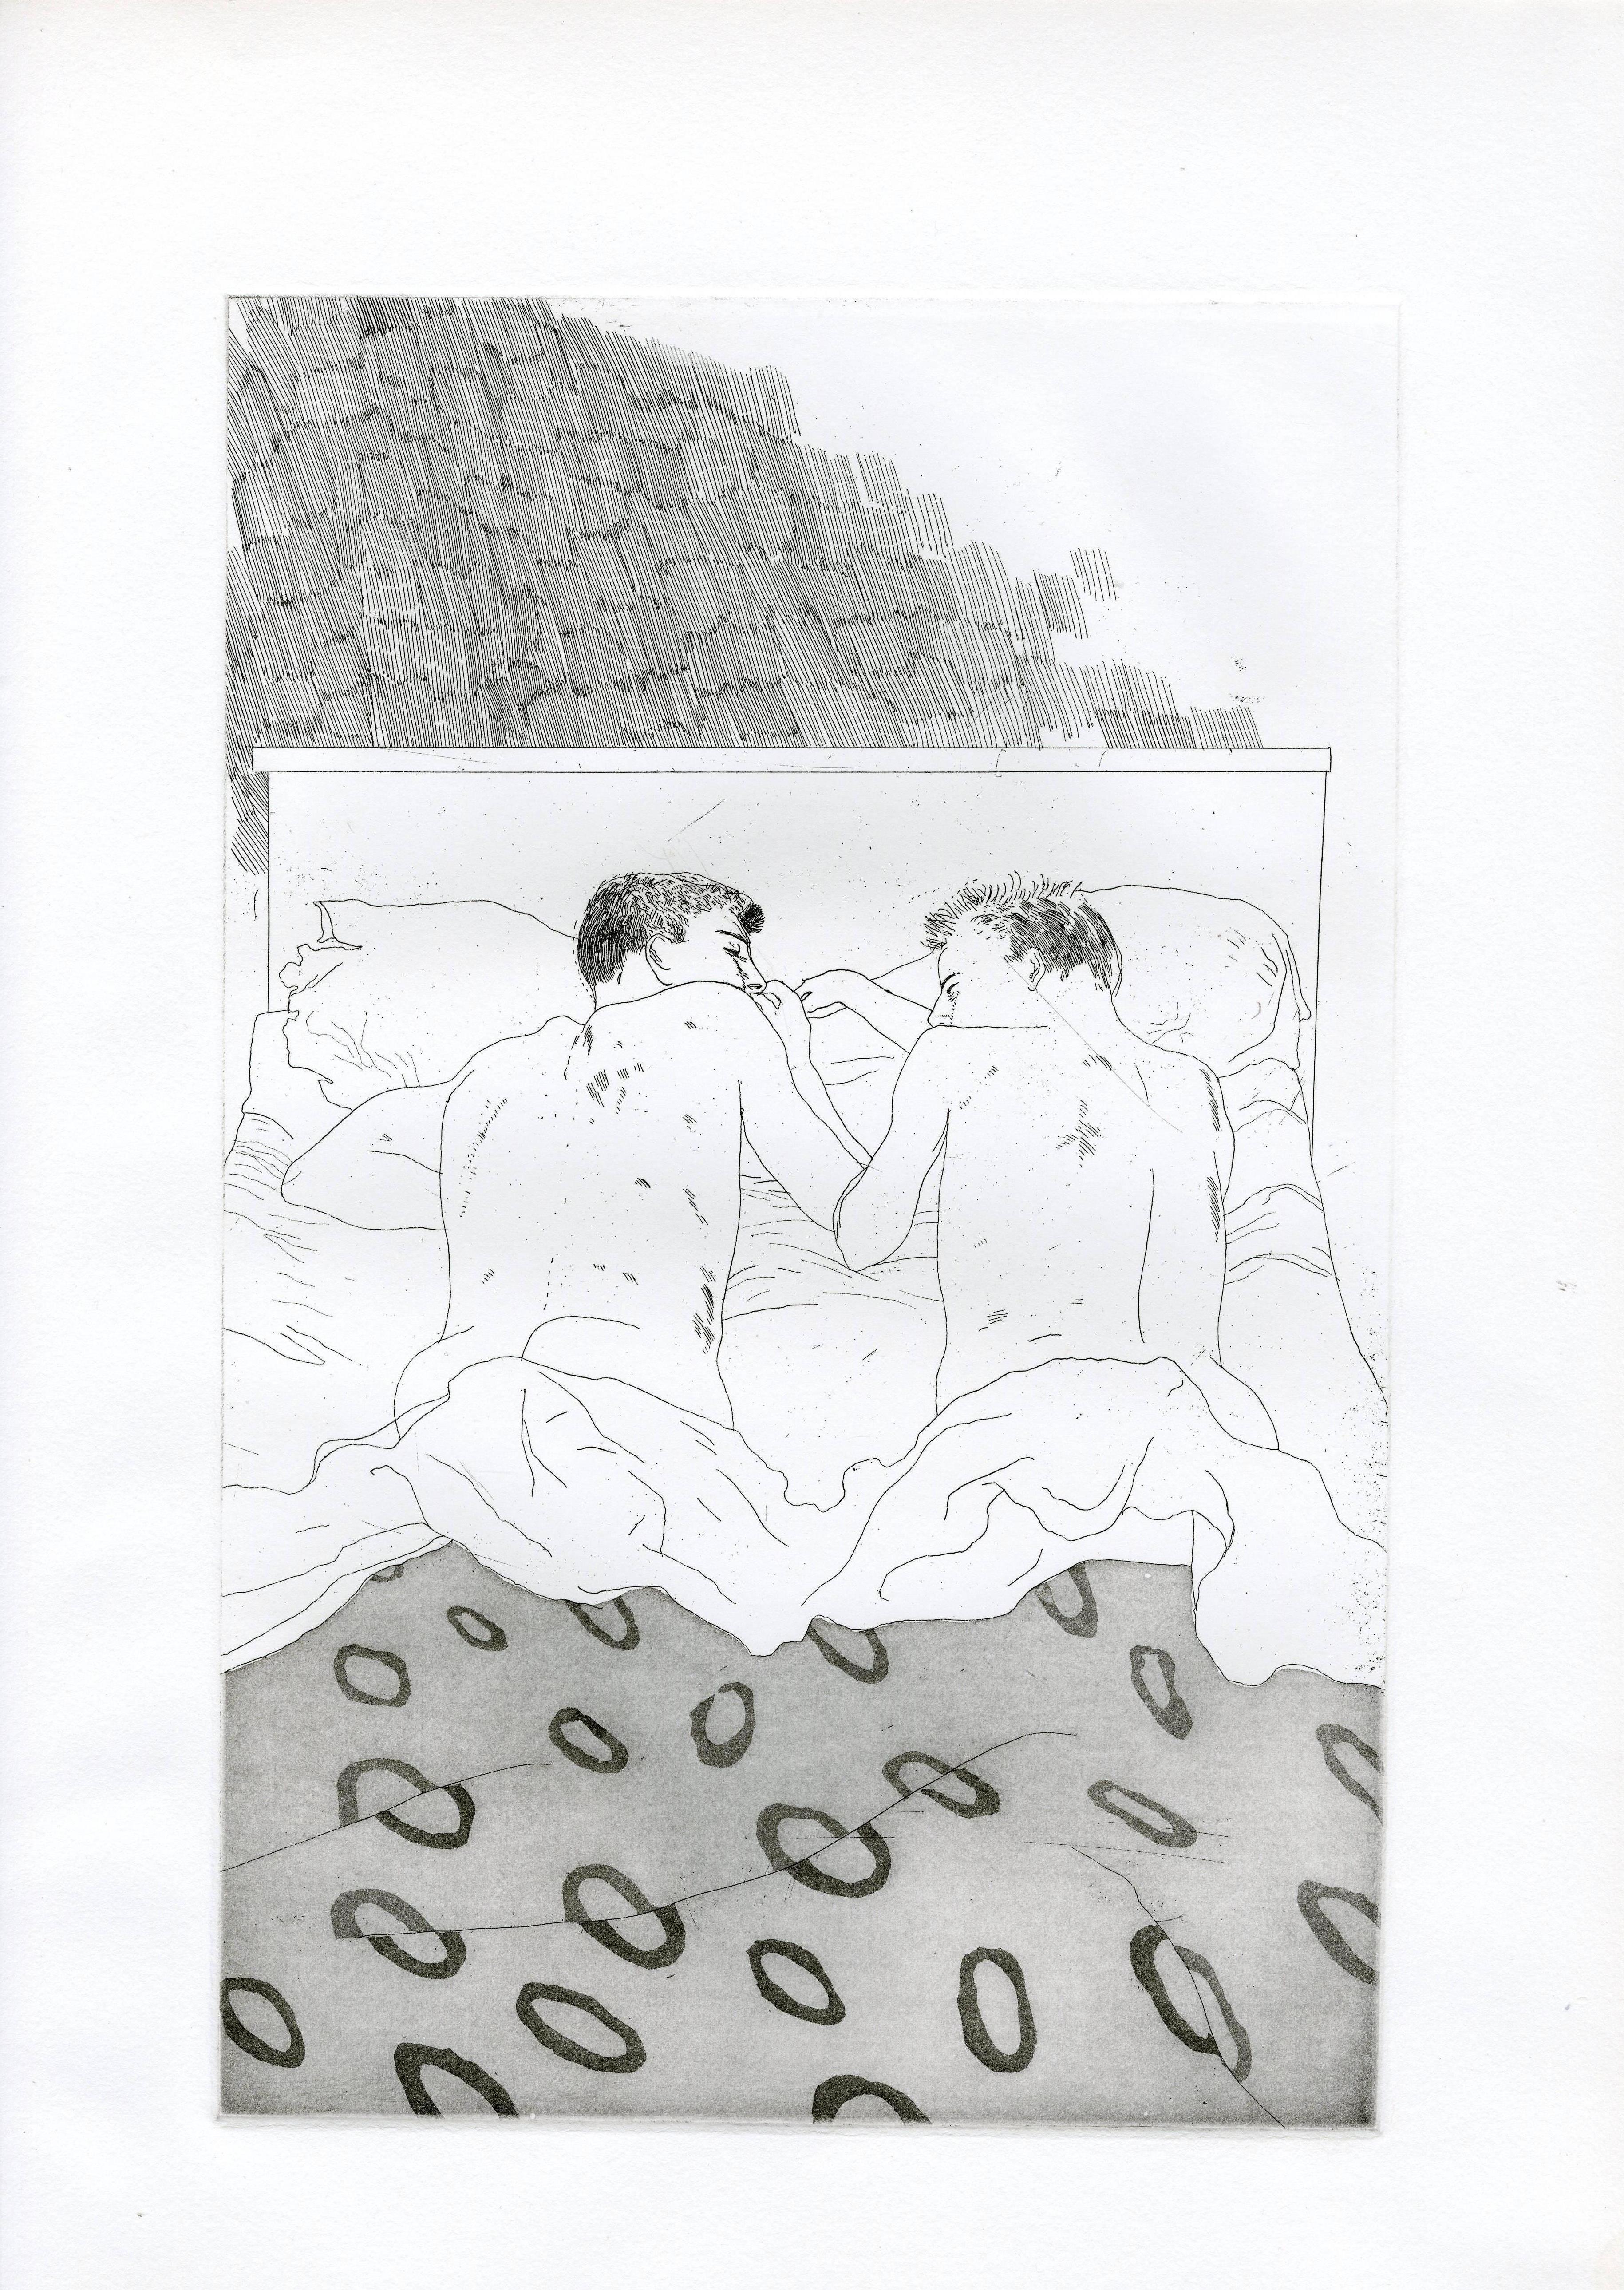 David Hockney Nude Print - Two Boys Aged 23 or 24 From: Fourteen Poems by C P Cavafy